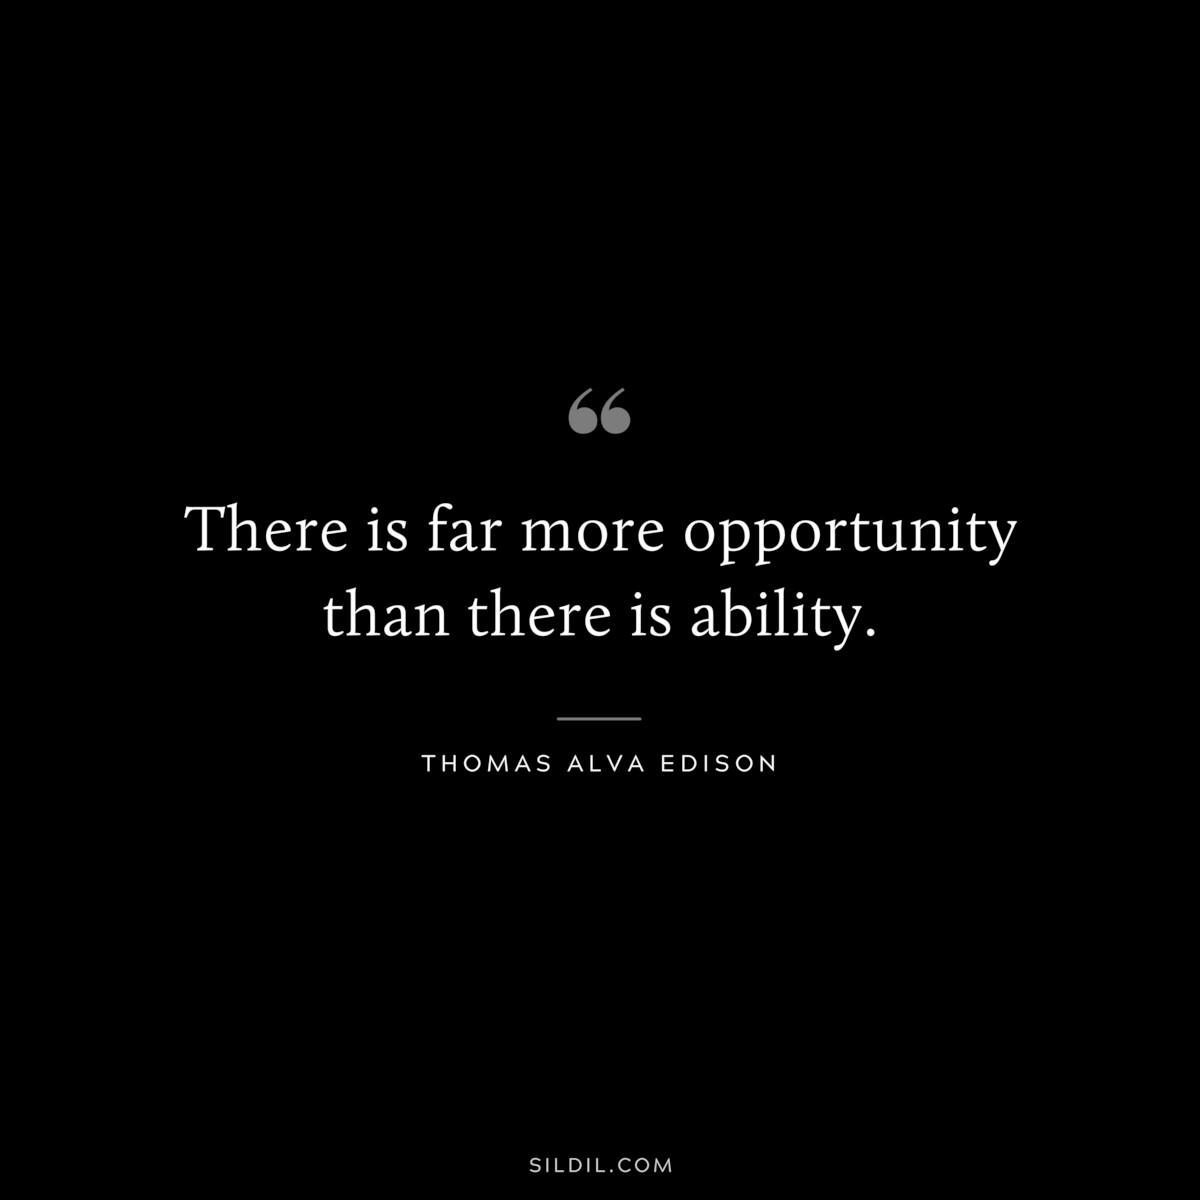 There is far more opportunity than there is ability. ― Thomas Alva Edison